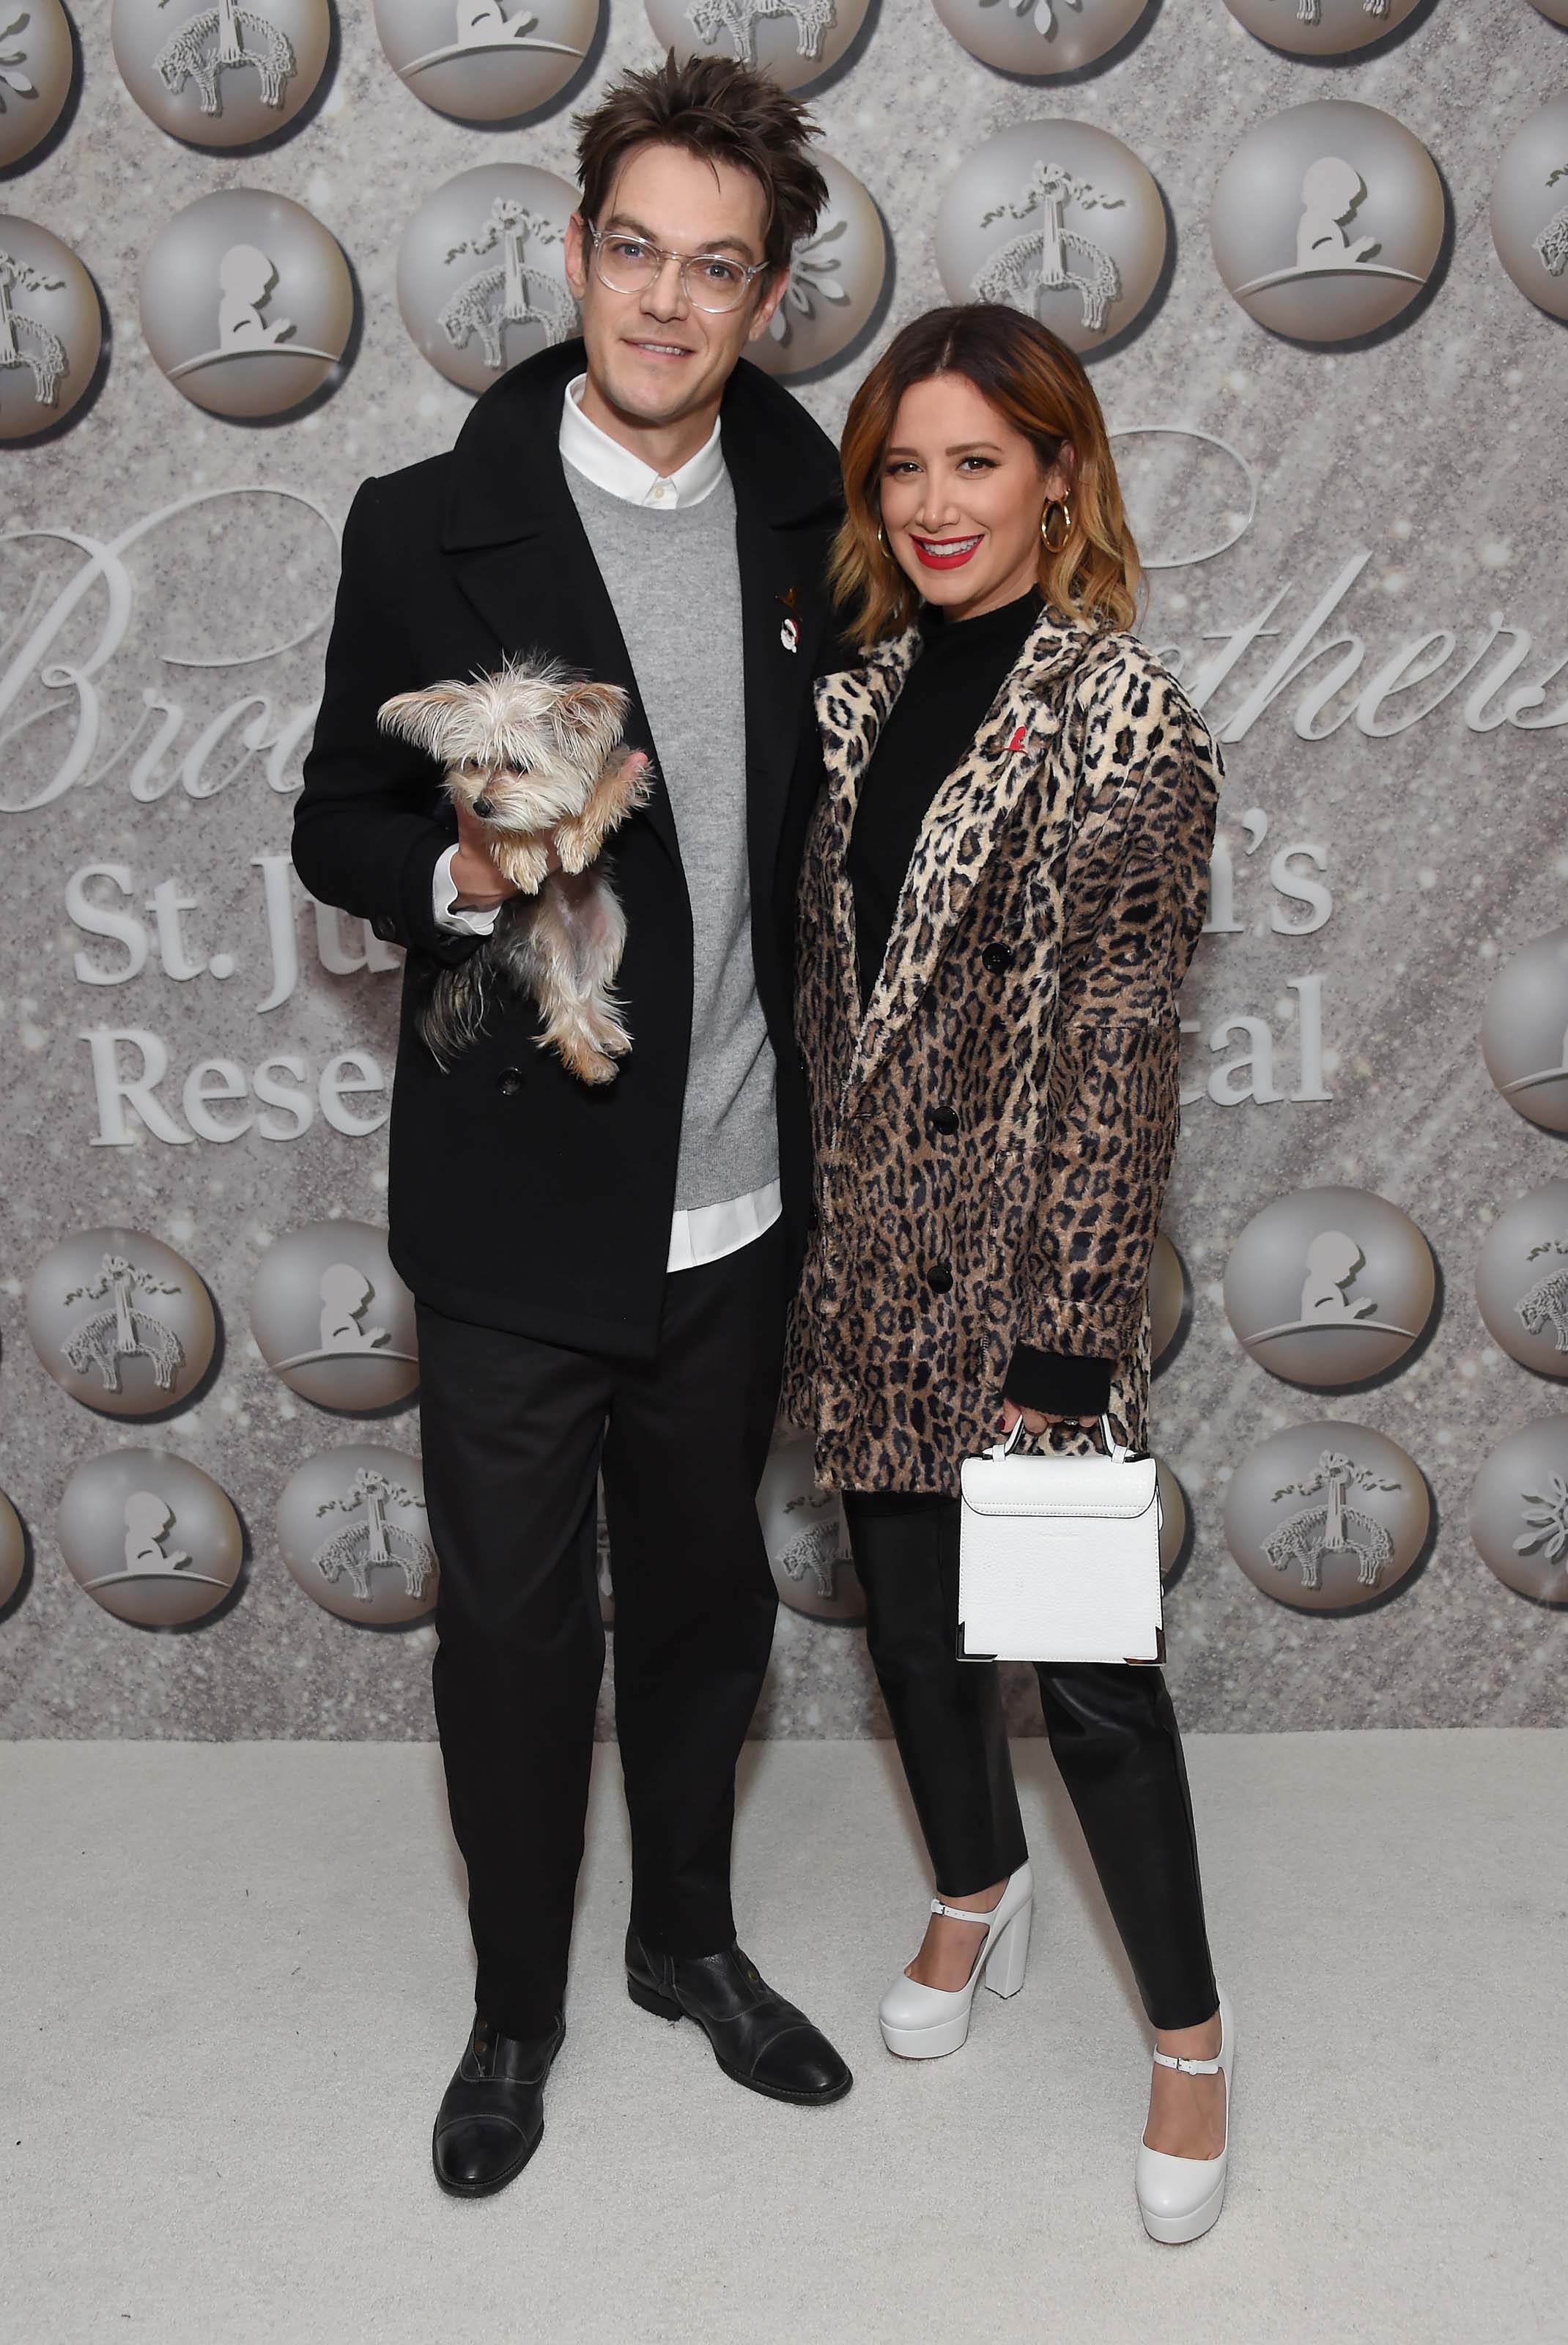 Ashley Tisdale attends Brooks Brothers Host Annual Holiday Celebration